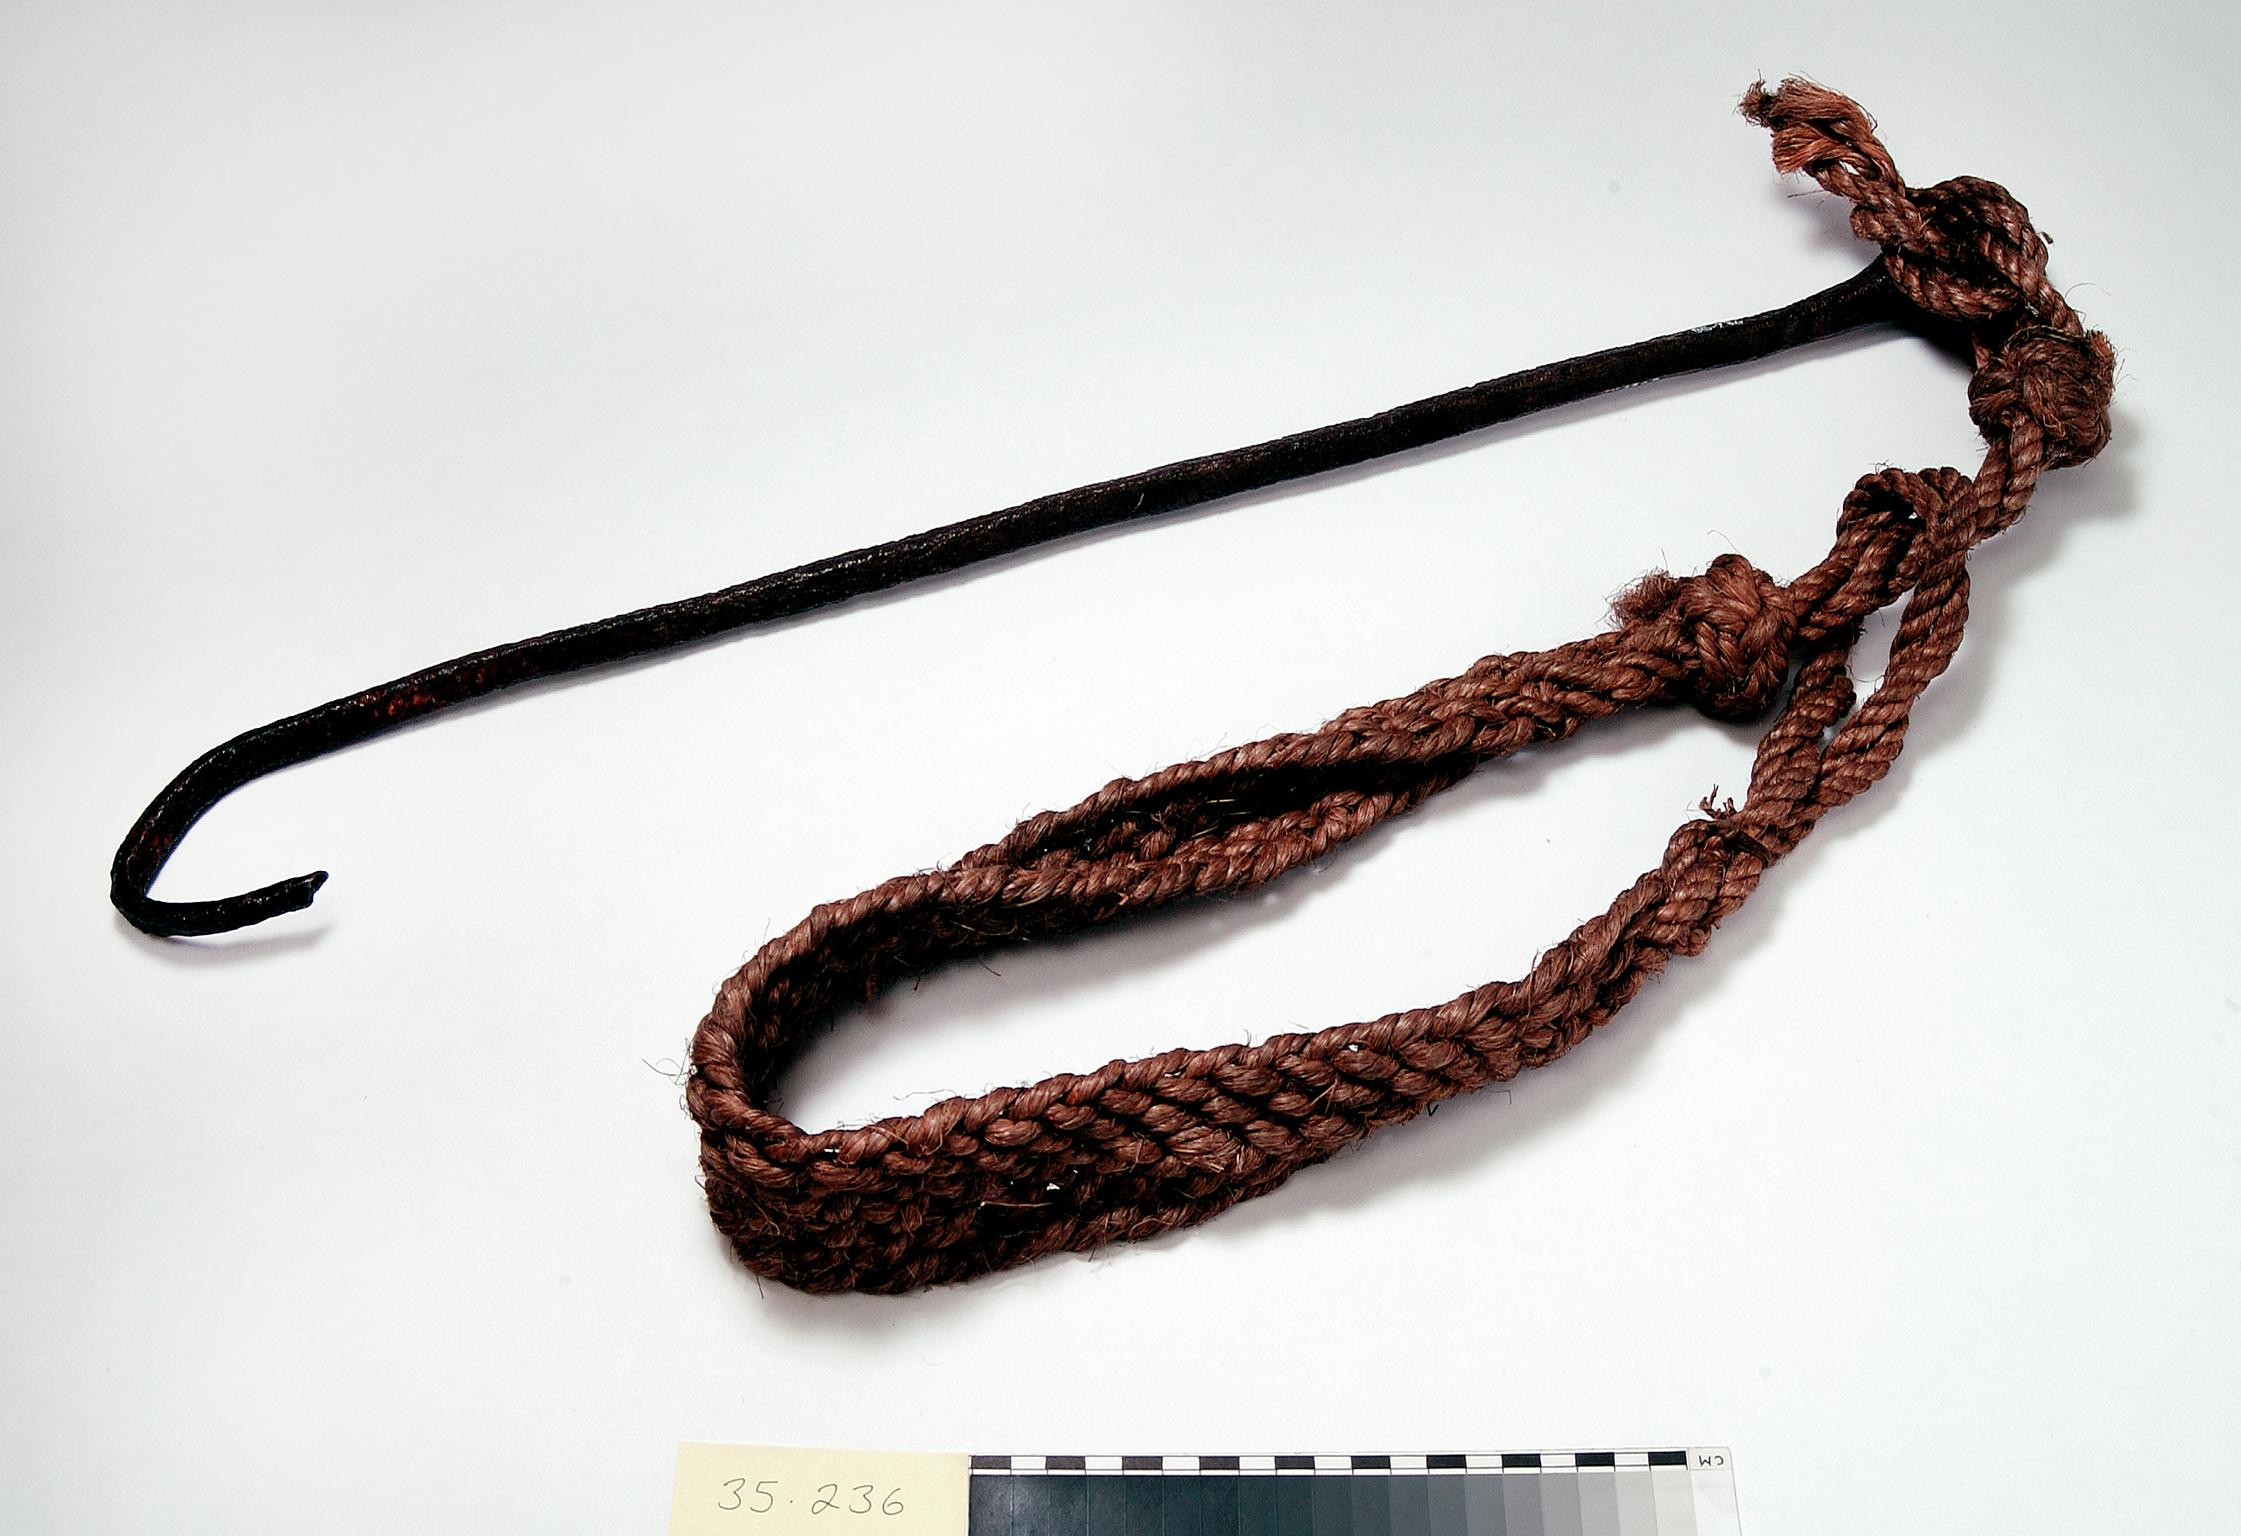 Replica rope-girdle from Brymbo Colliery